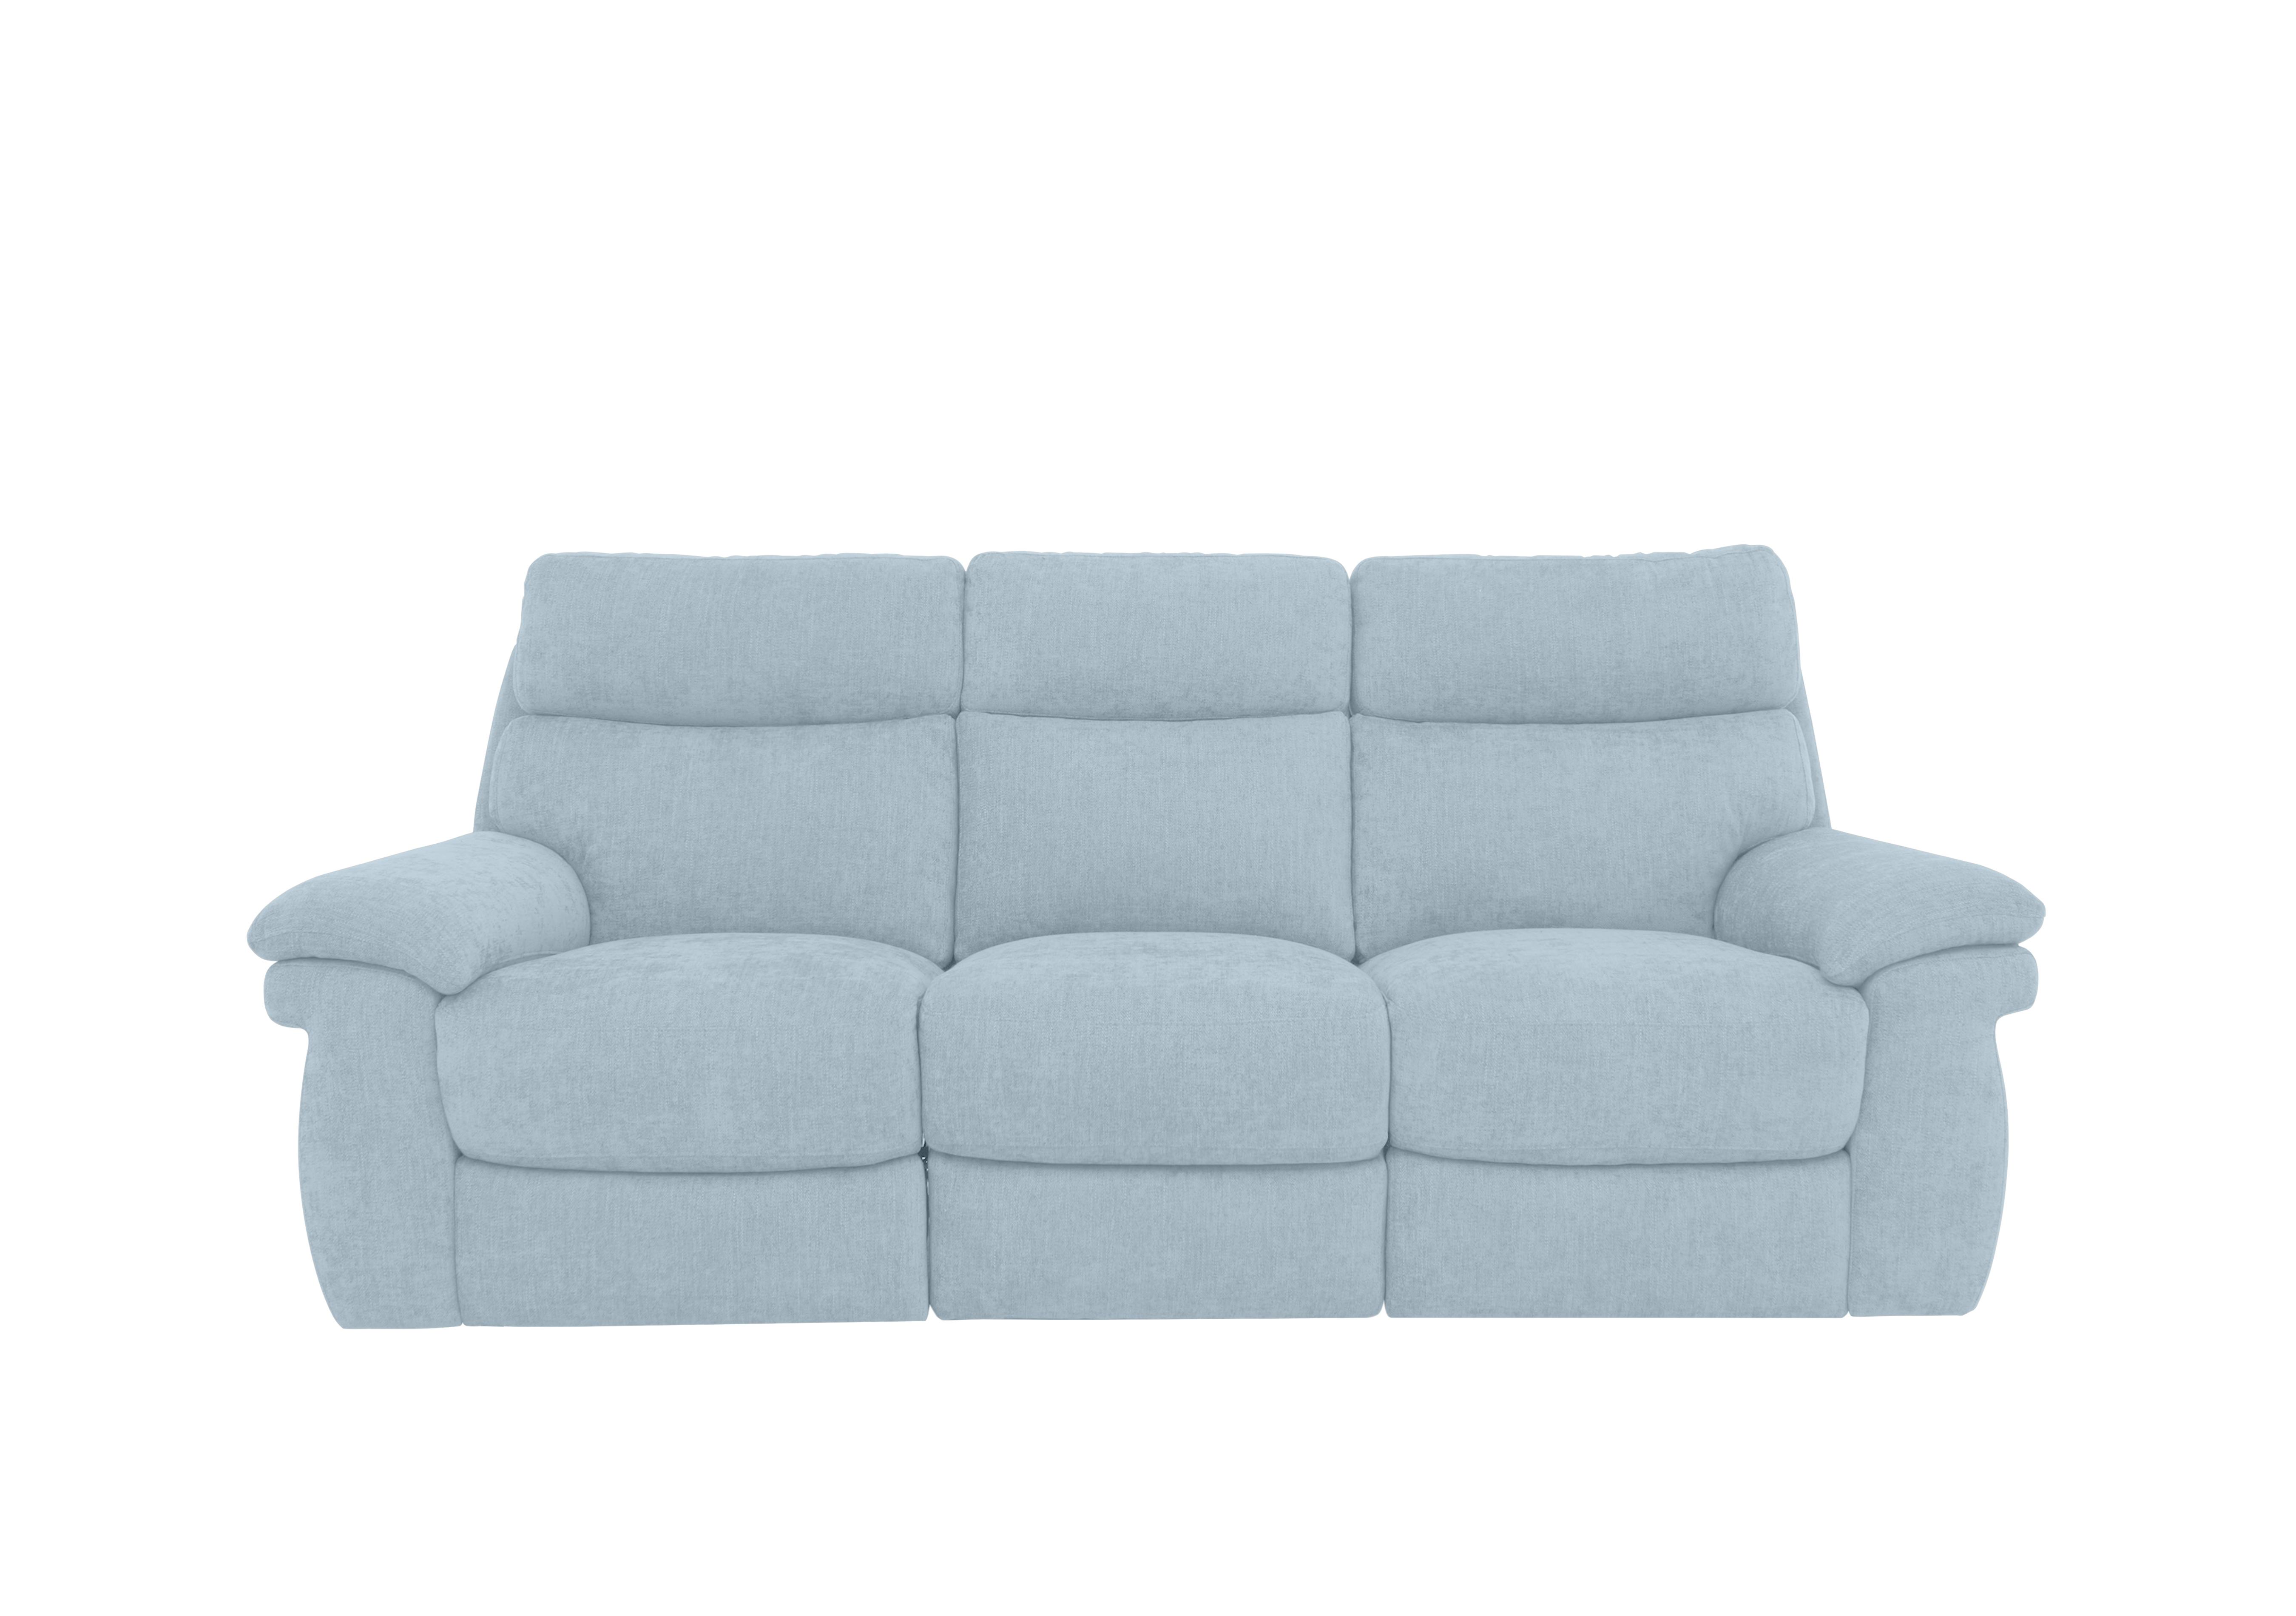 Serene 3 Seater Fabric Sofa in Fab-Meo-R17 Baby Blue on Furniture Village